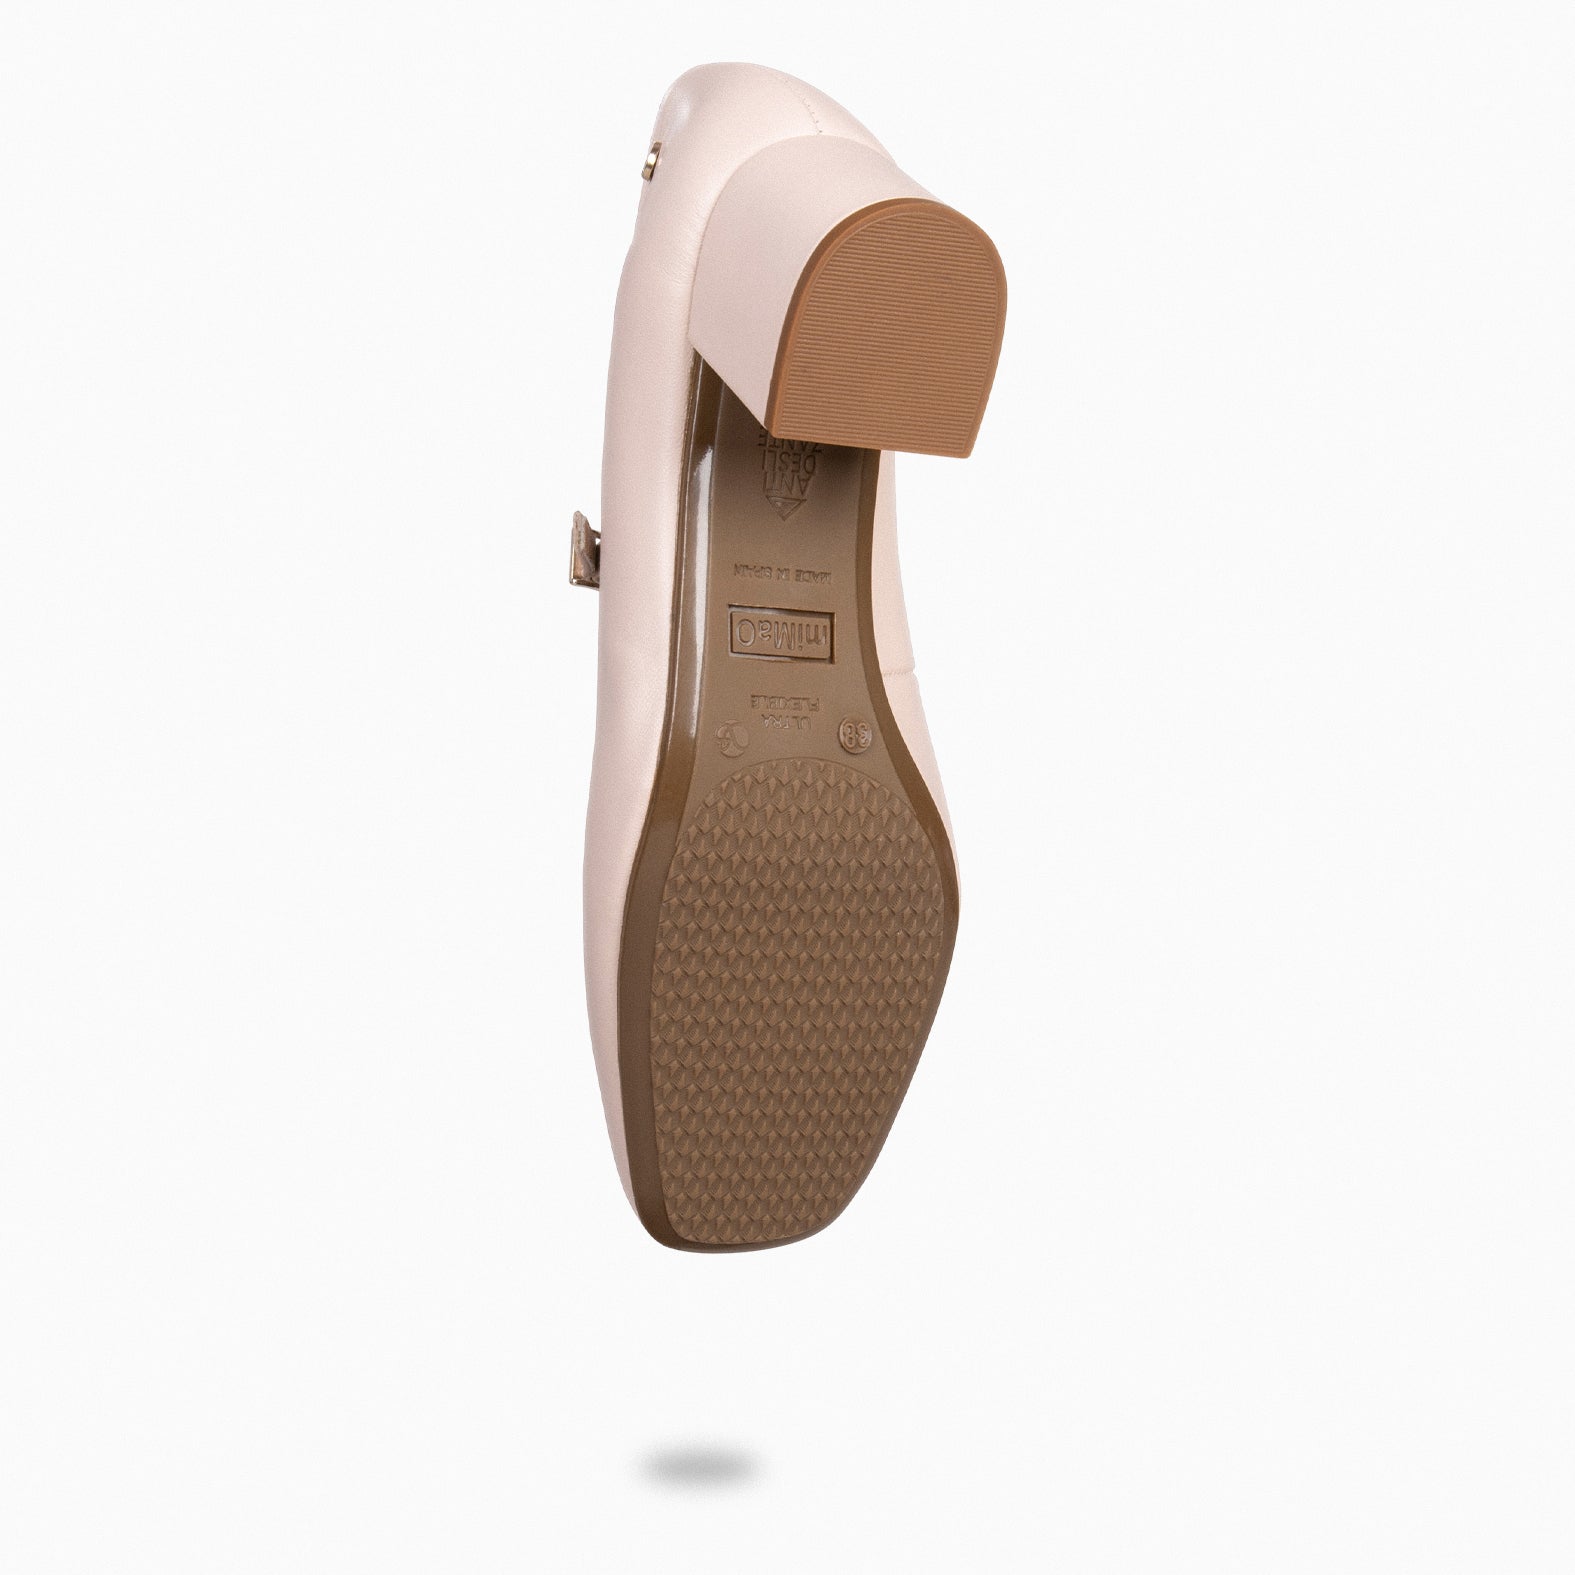 BELLA – NUDE suede leather mary-jane shoes